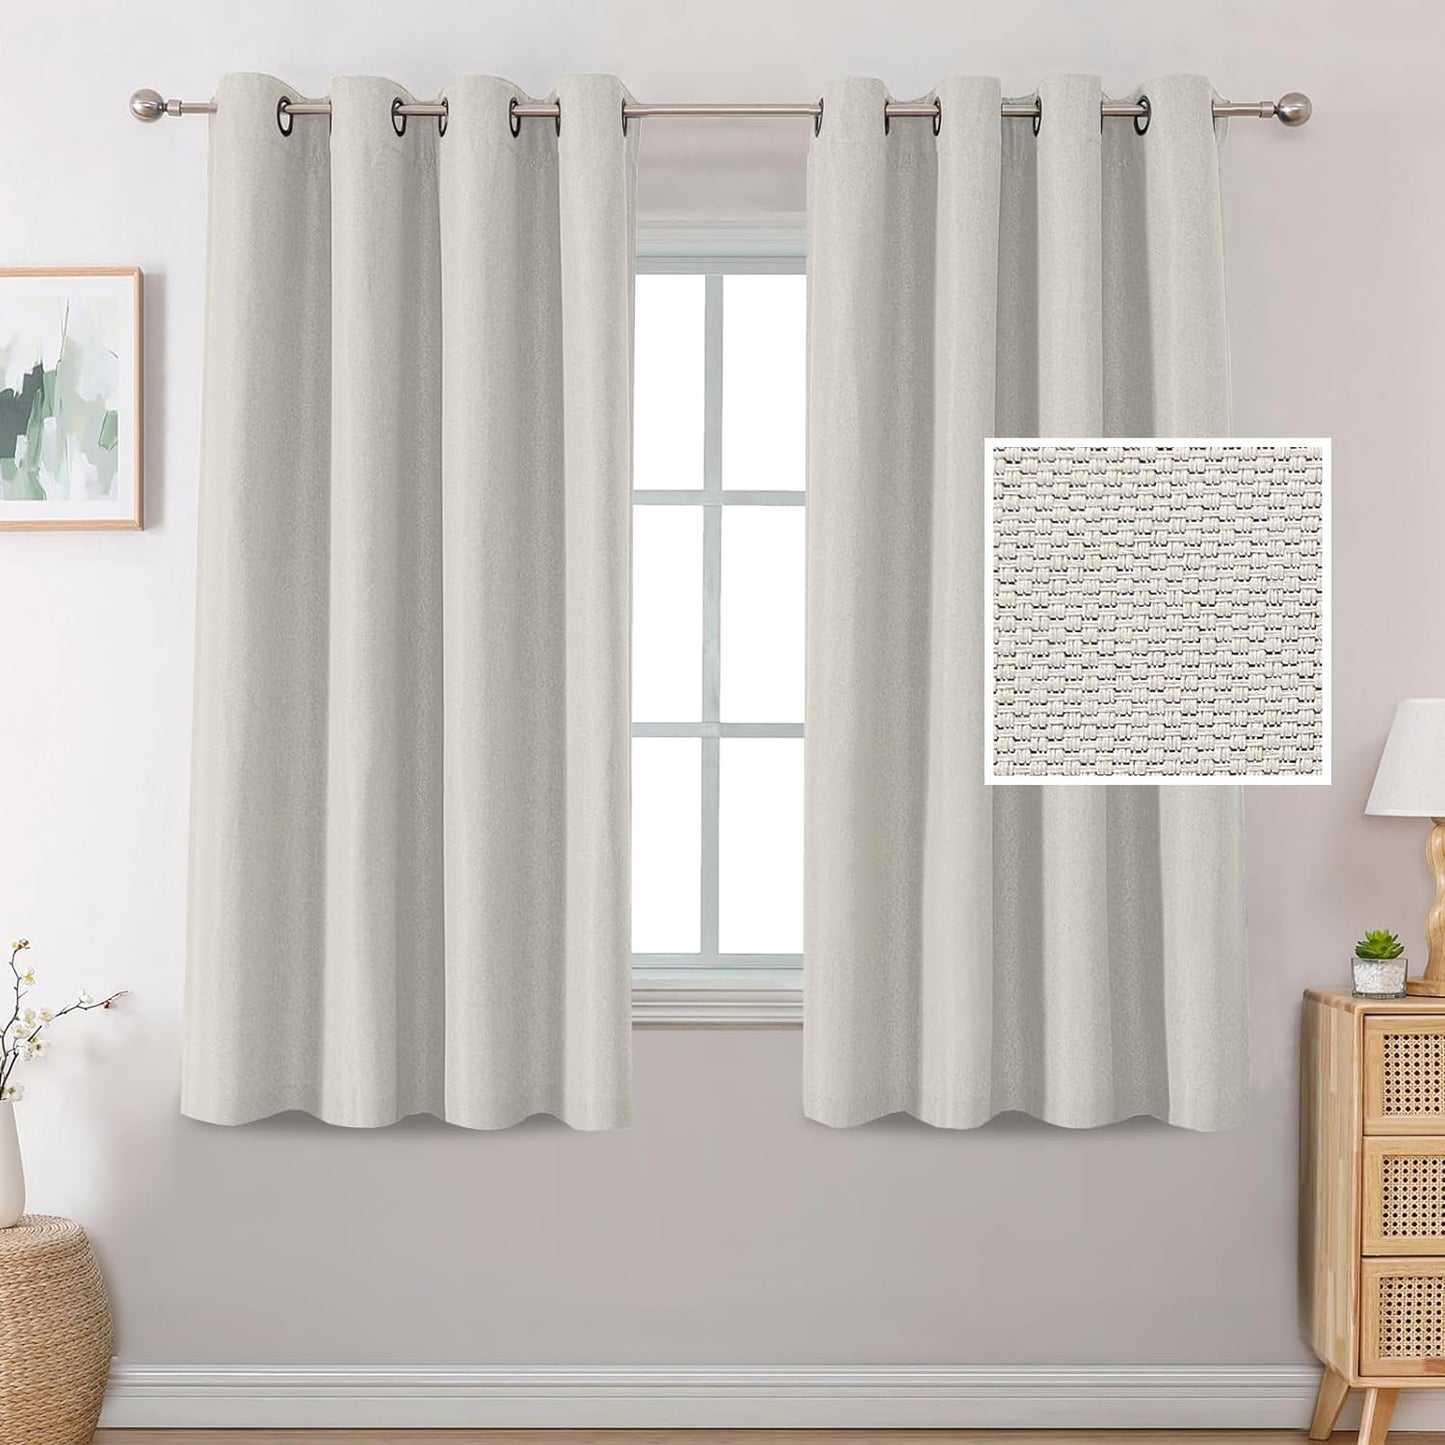 H.VERSAILTEX Linen Blackout Curtains 84 Inches Long Thermal Insulated Room Darkening Linen Curtains for Bedroom Textured Burlap Grommet Window Curtains for Living Room, Bluestone and Taupe, 2 Panels  H.VERSAILTEX Off White 52"W X 54"L 